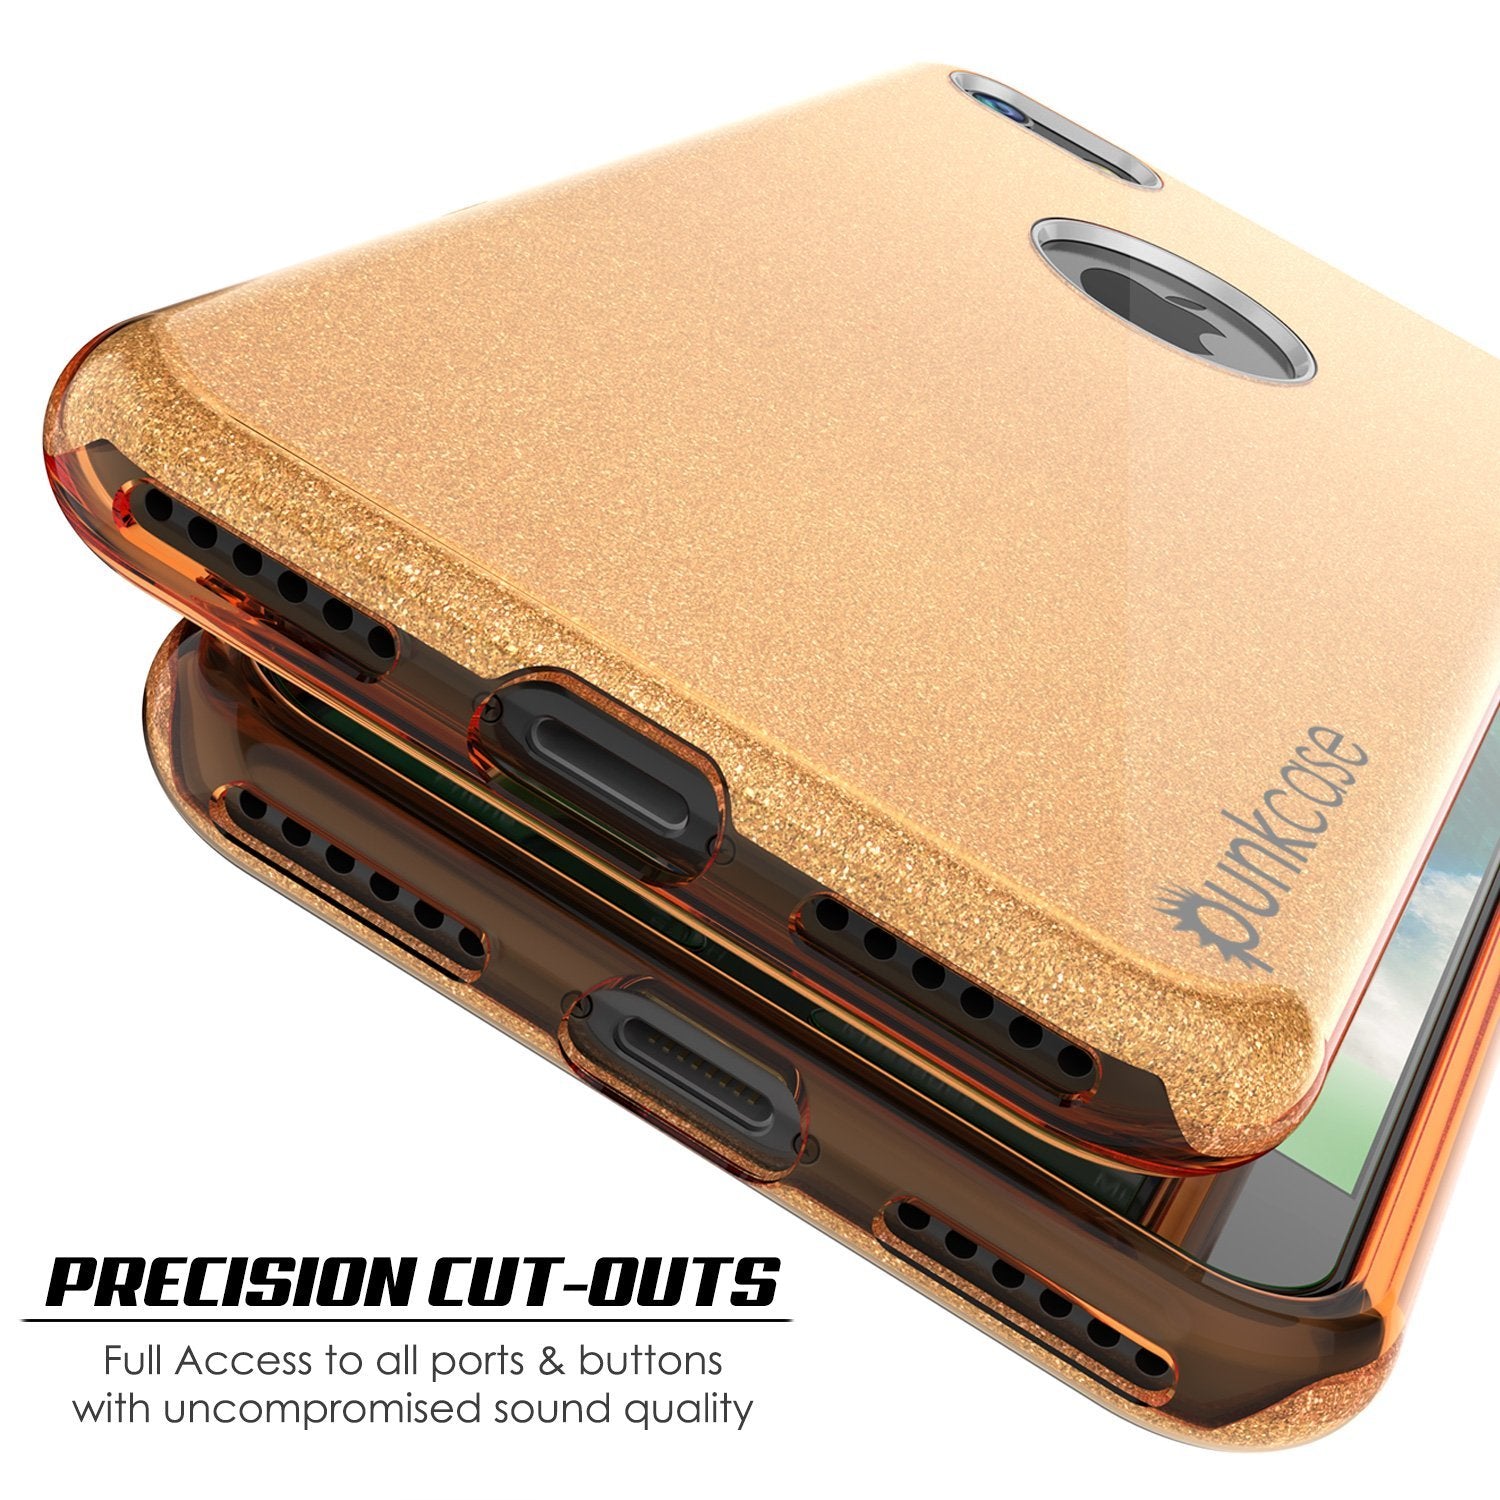 iPhone SE (4.7") Case, Punkcase Galactic 2.0 Series Ultra Slim Protective Armor TPU Cover [Gold]